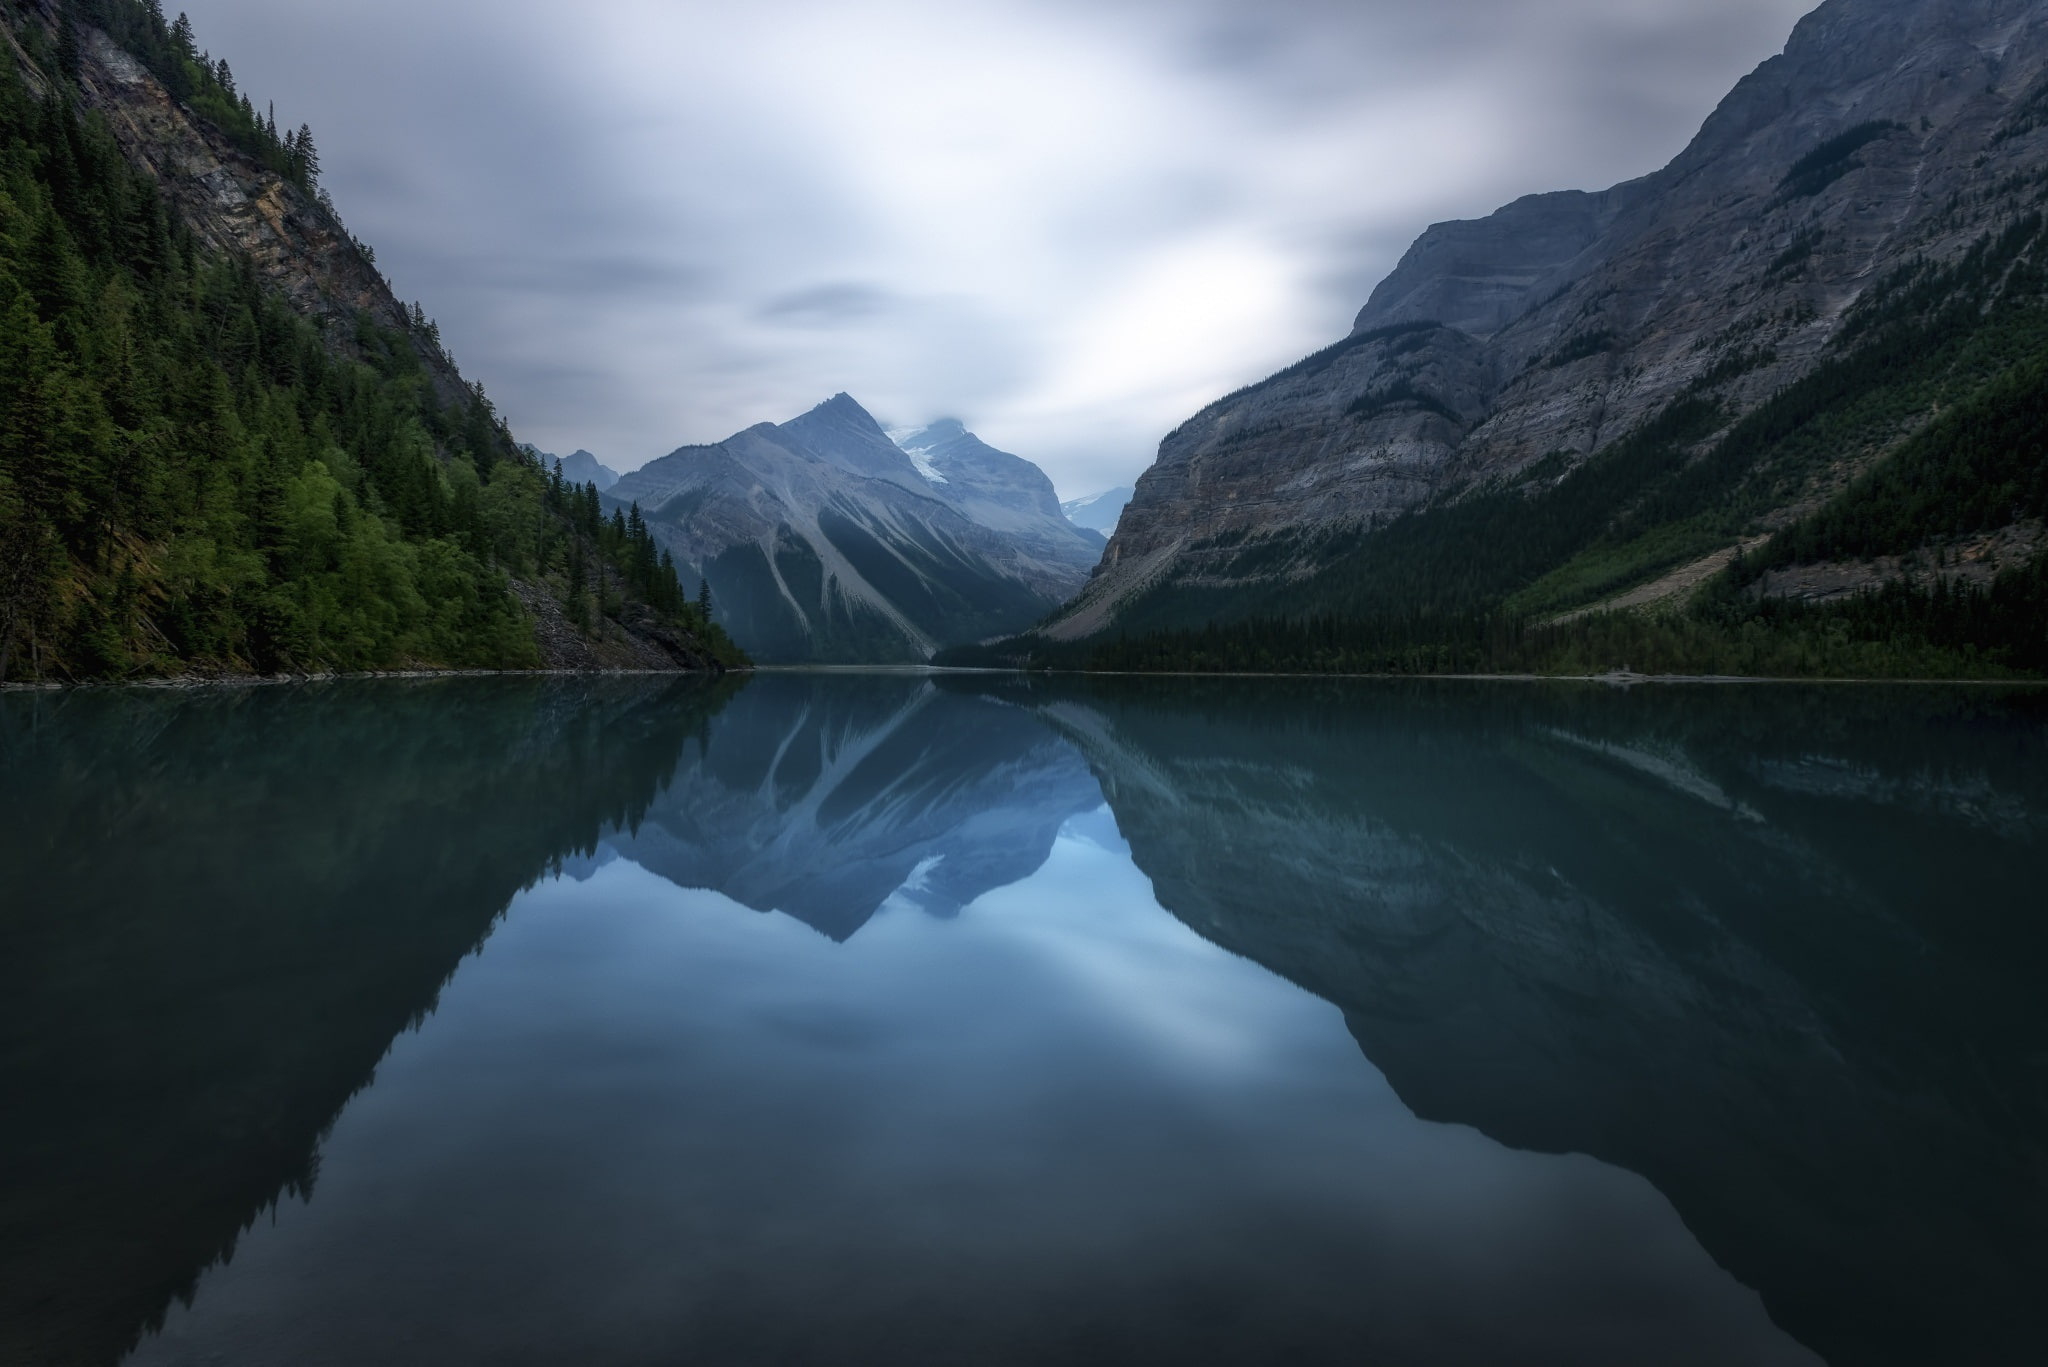 the sky, trees, mountains, nature, lake, reflection, water